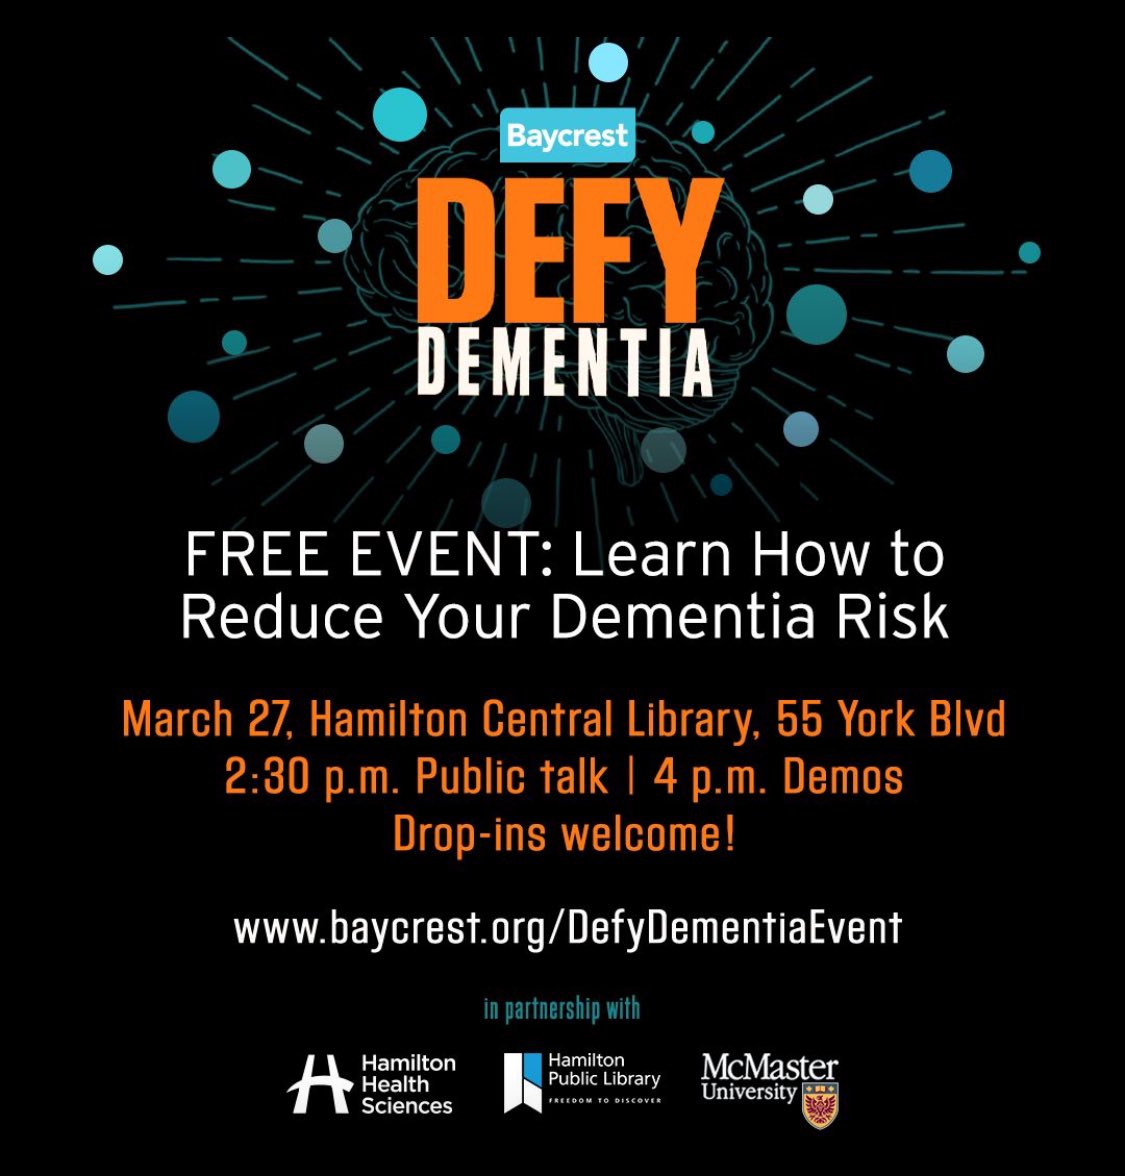 The #DefyDementia team is hitting the road again! Join us at Hamilton Central Library on Wed Mar 27 from 2-5 pm, along with our podcast guests Dr. Jennifer Heisz and Ravi Venkatesh, as we discuss how #EVERYONE can live a brain healthy lifestyle. Take part in an interactive panel